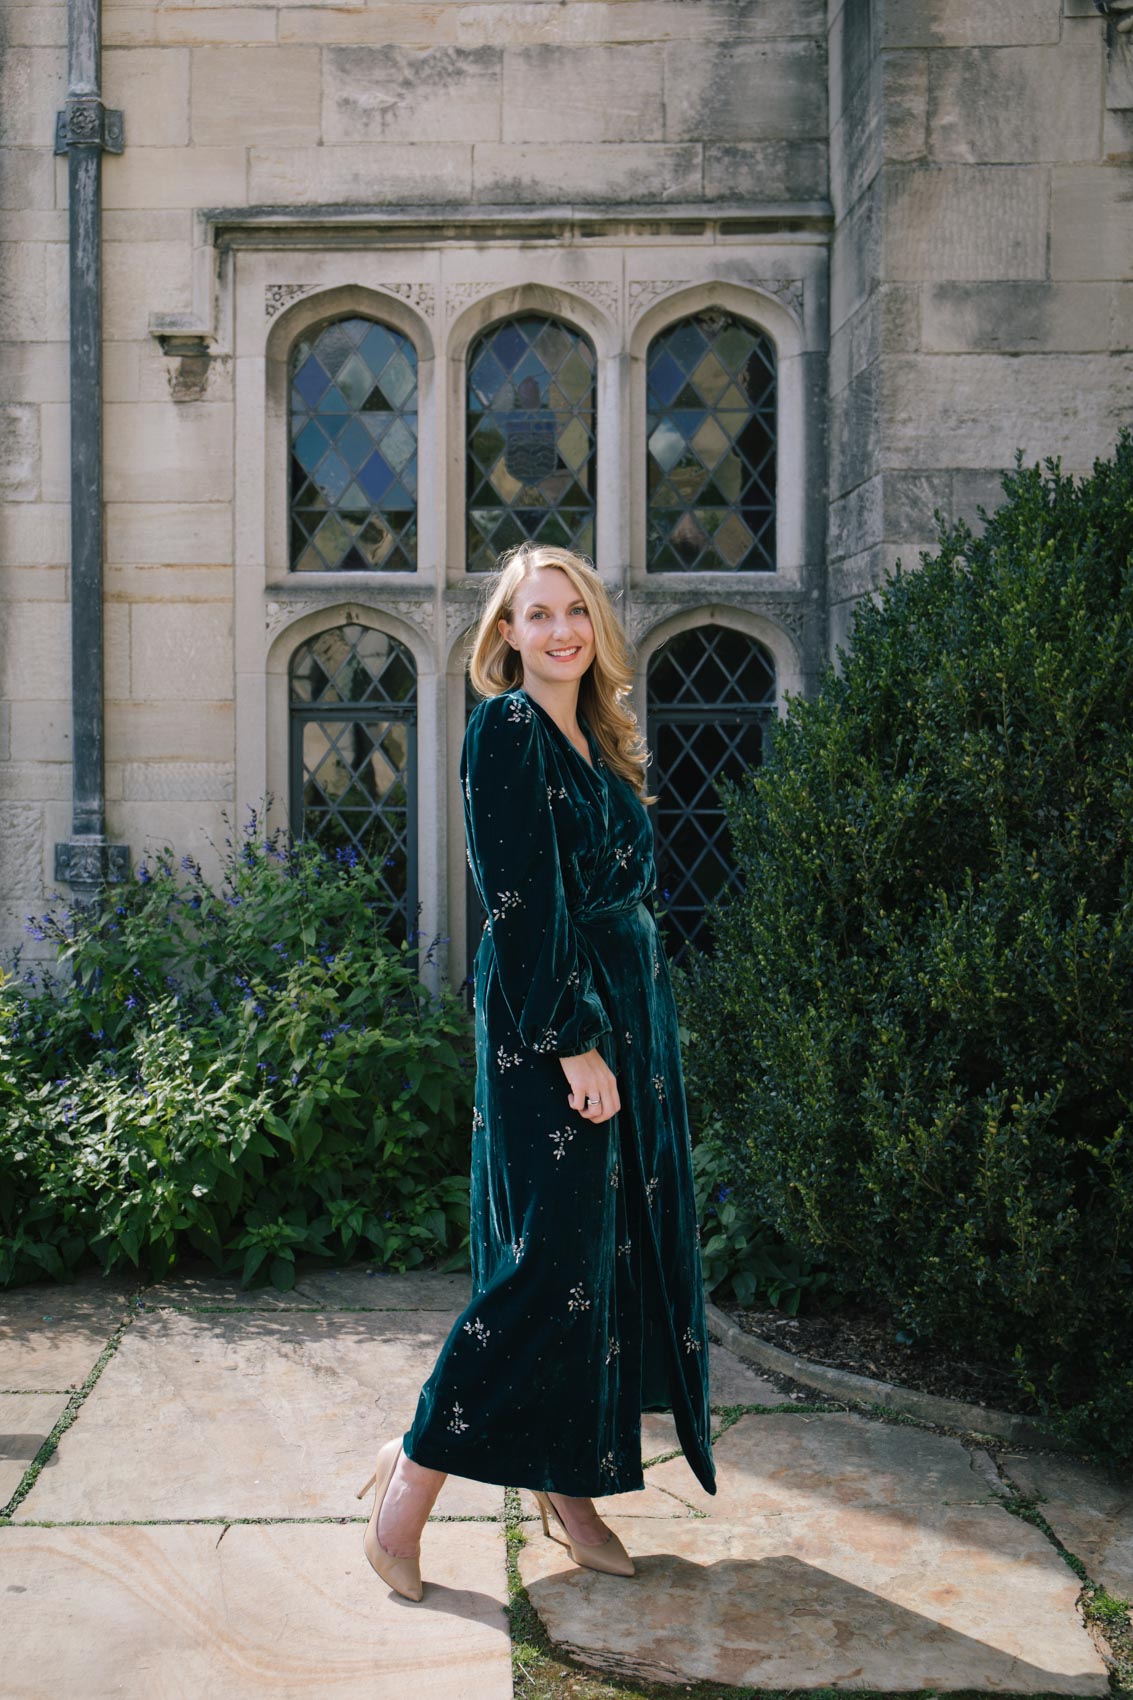 Allyn Lewis styles a glamorous velvet dress wrap dress for holiday outfit inspiration #winterfashion #fashionphotography #winteroutift 